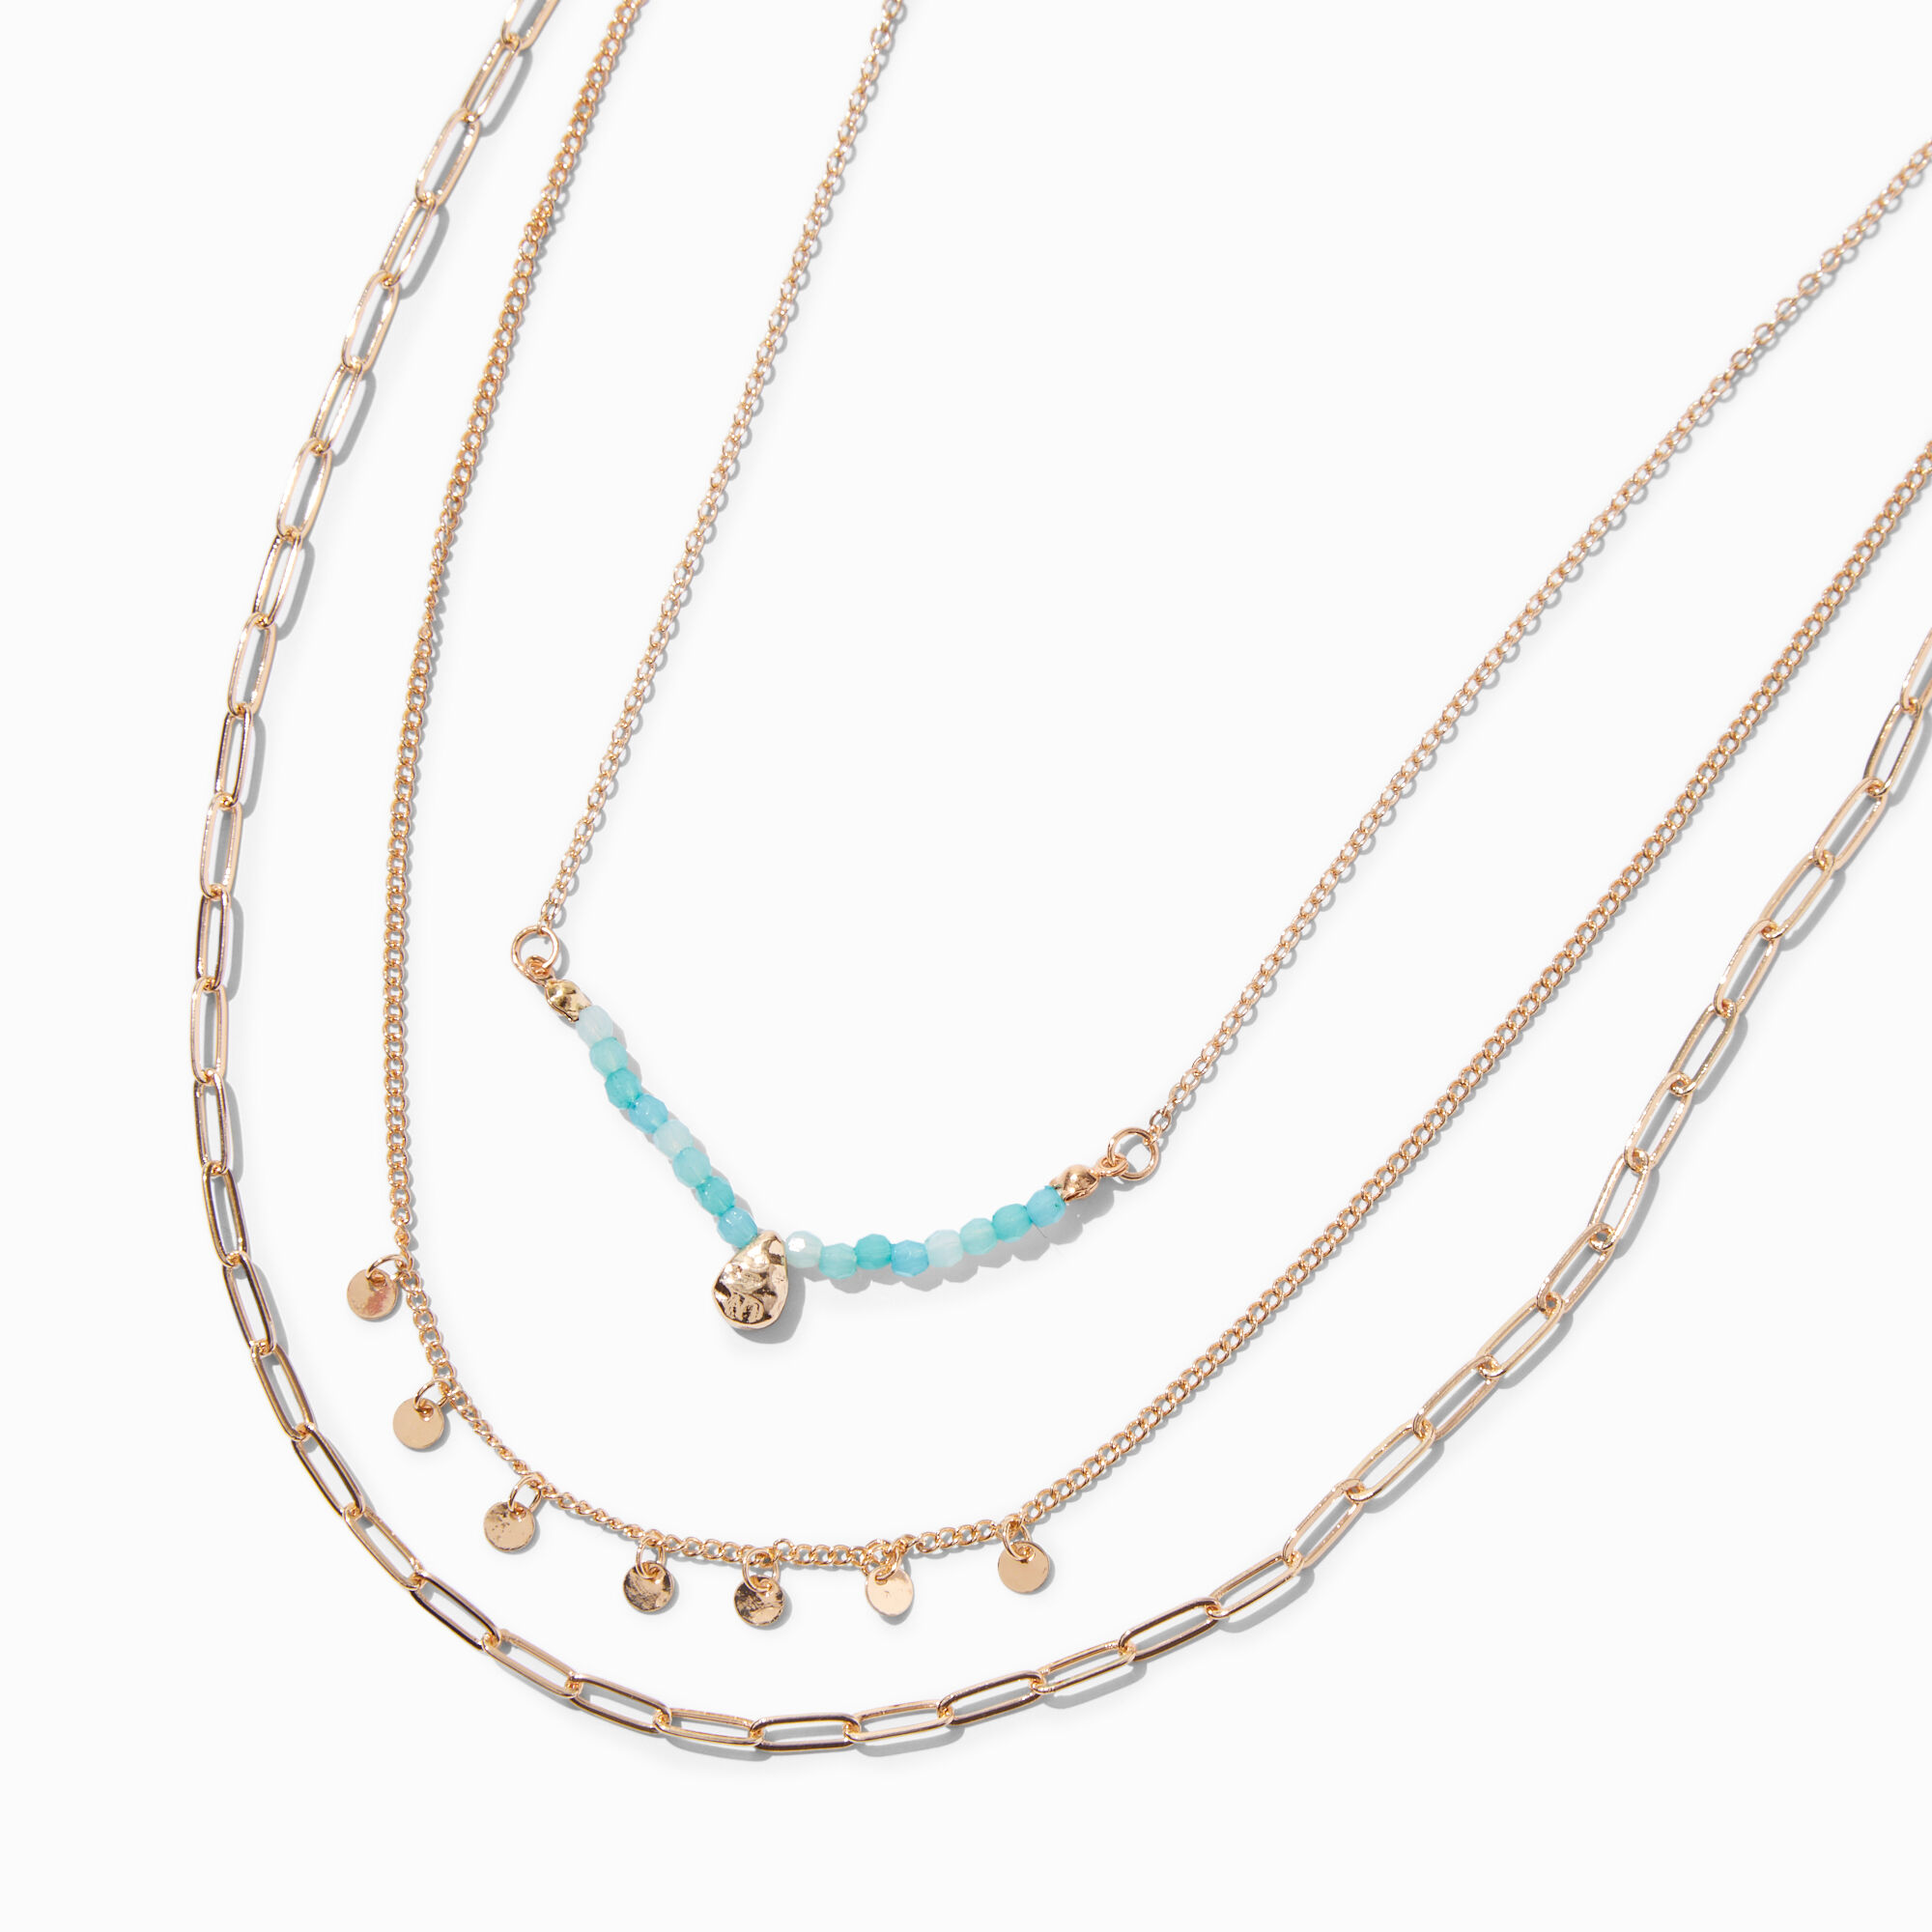 View Claires Beaded GoldTone Disc MultiStrand Necklace Turquoise information